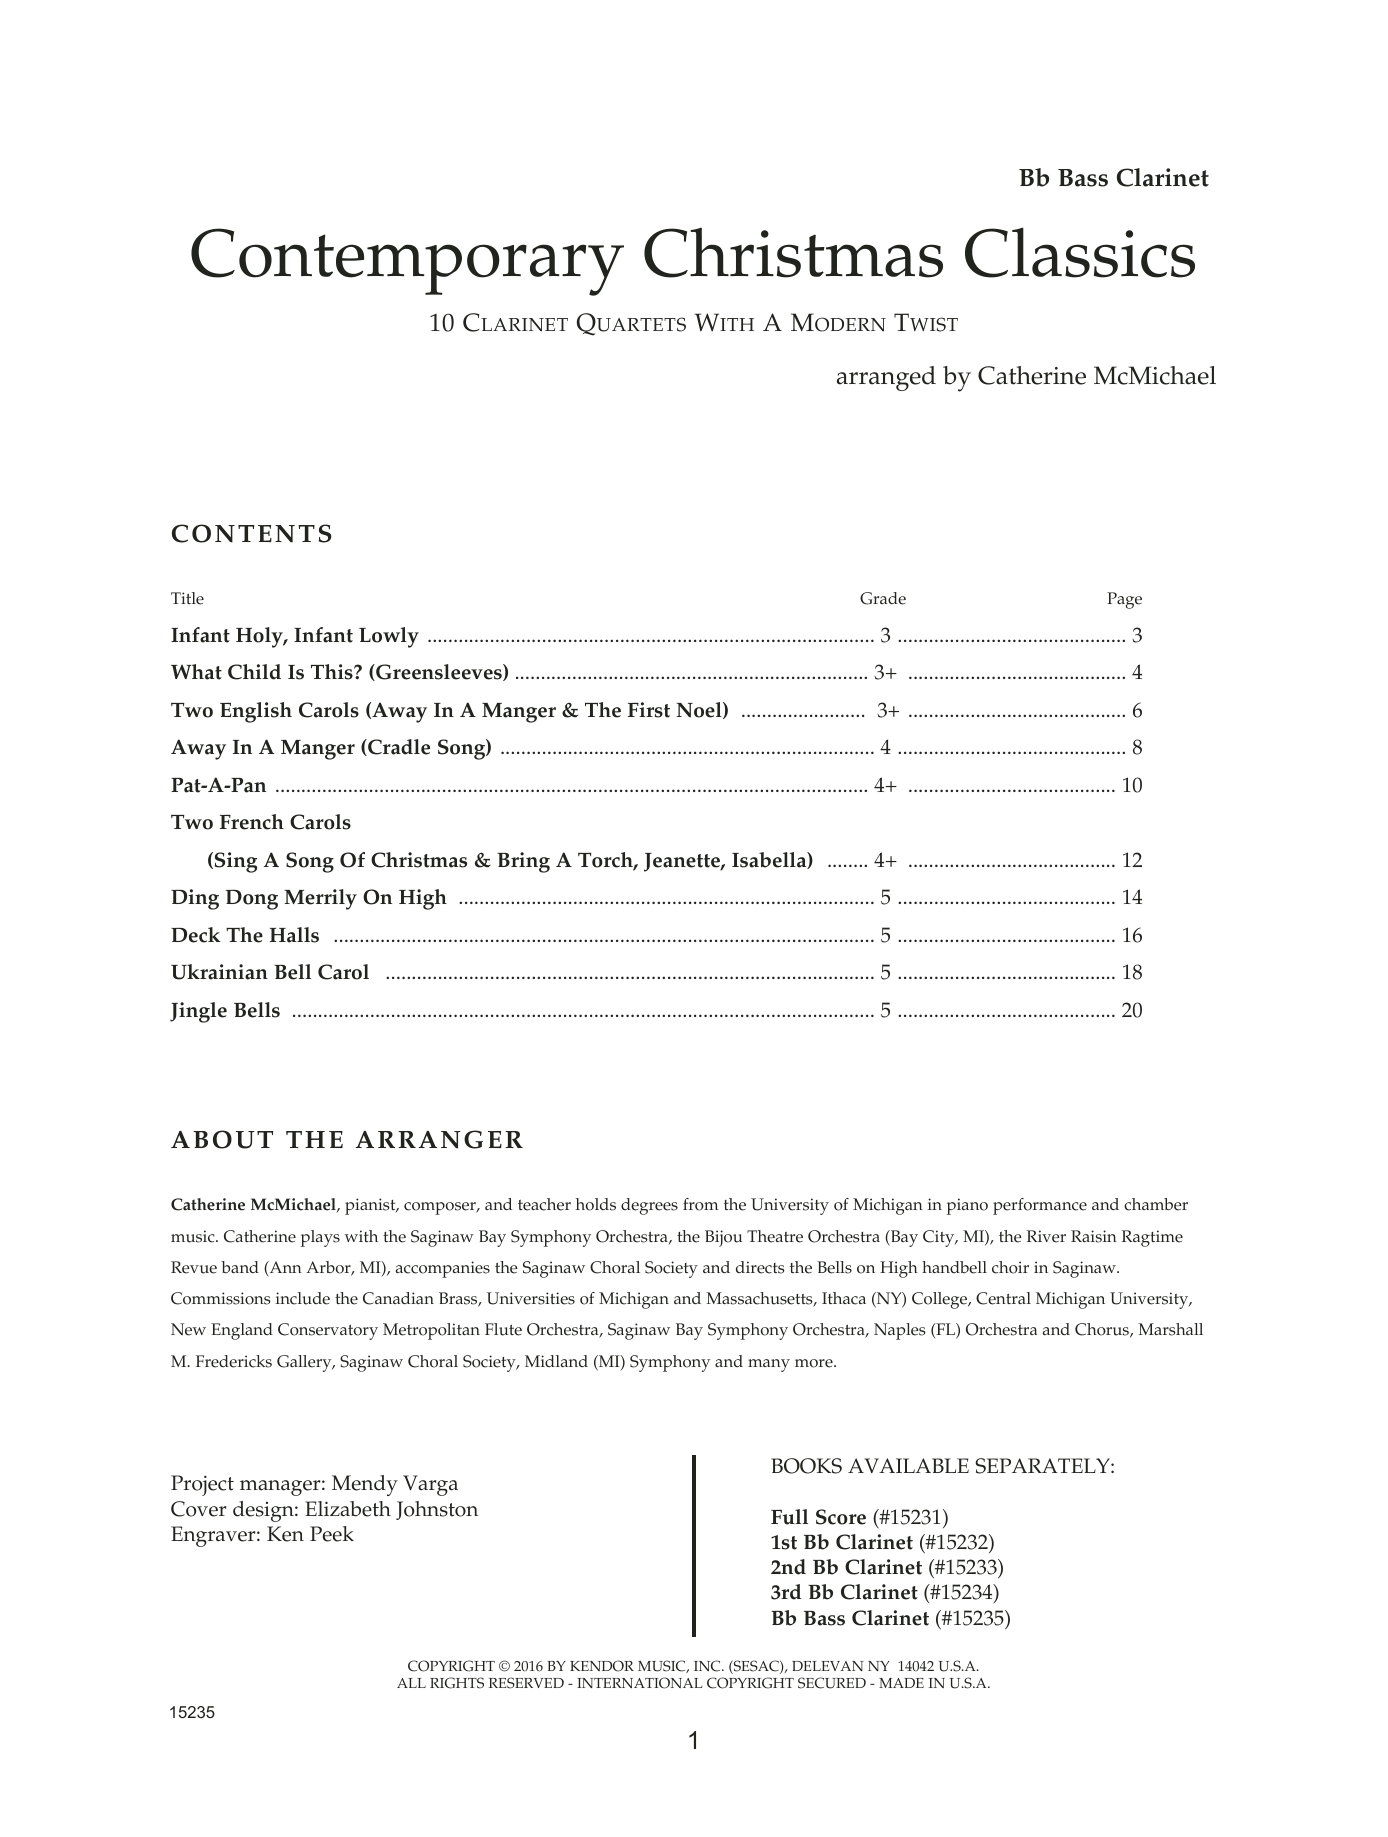 Download Catherine McMichael Contemporary Christmas Classics - Bb Ba Sheet Music